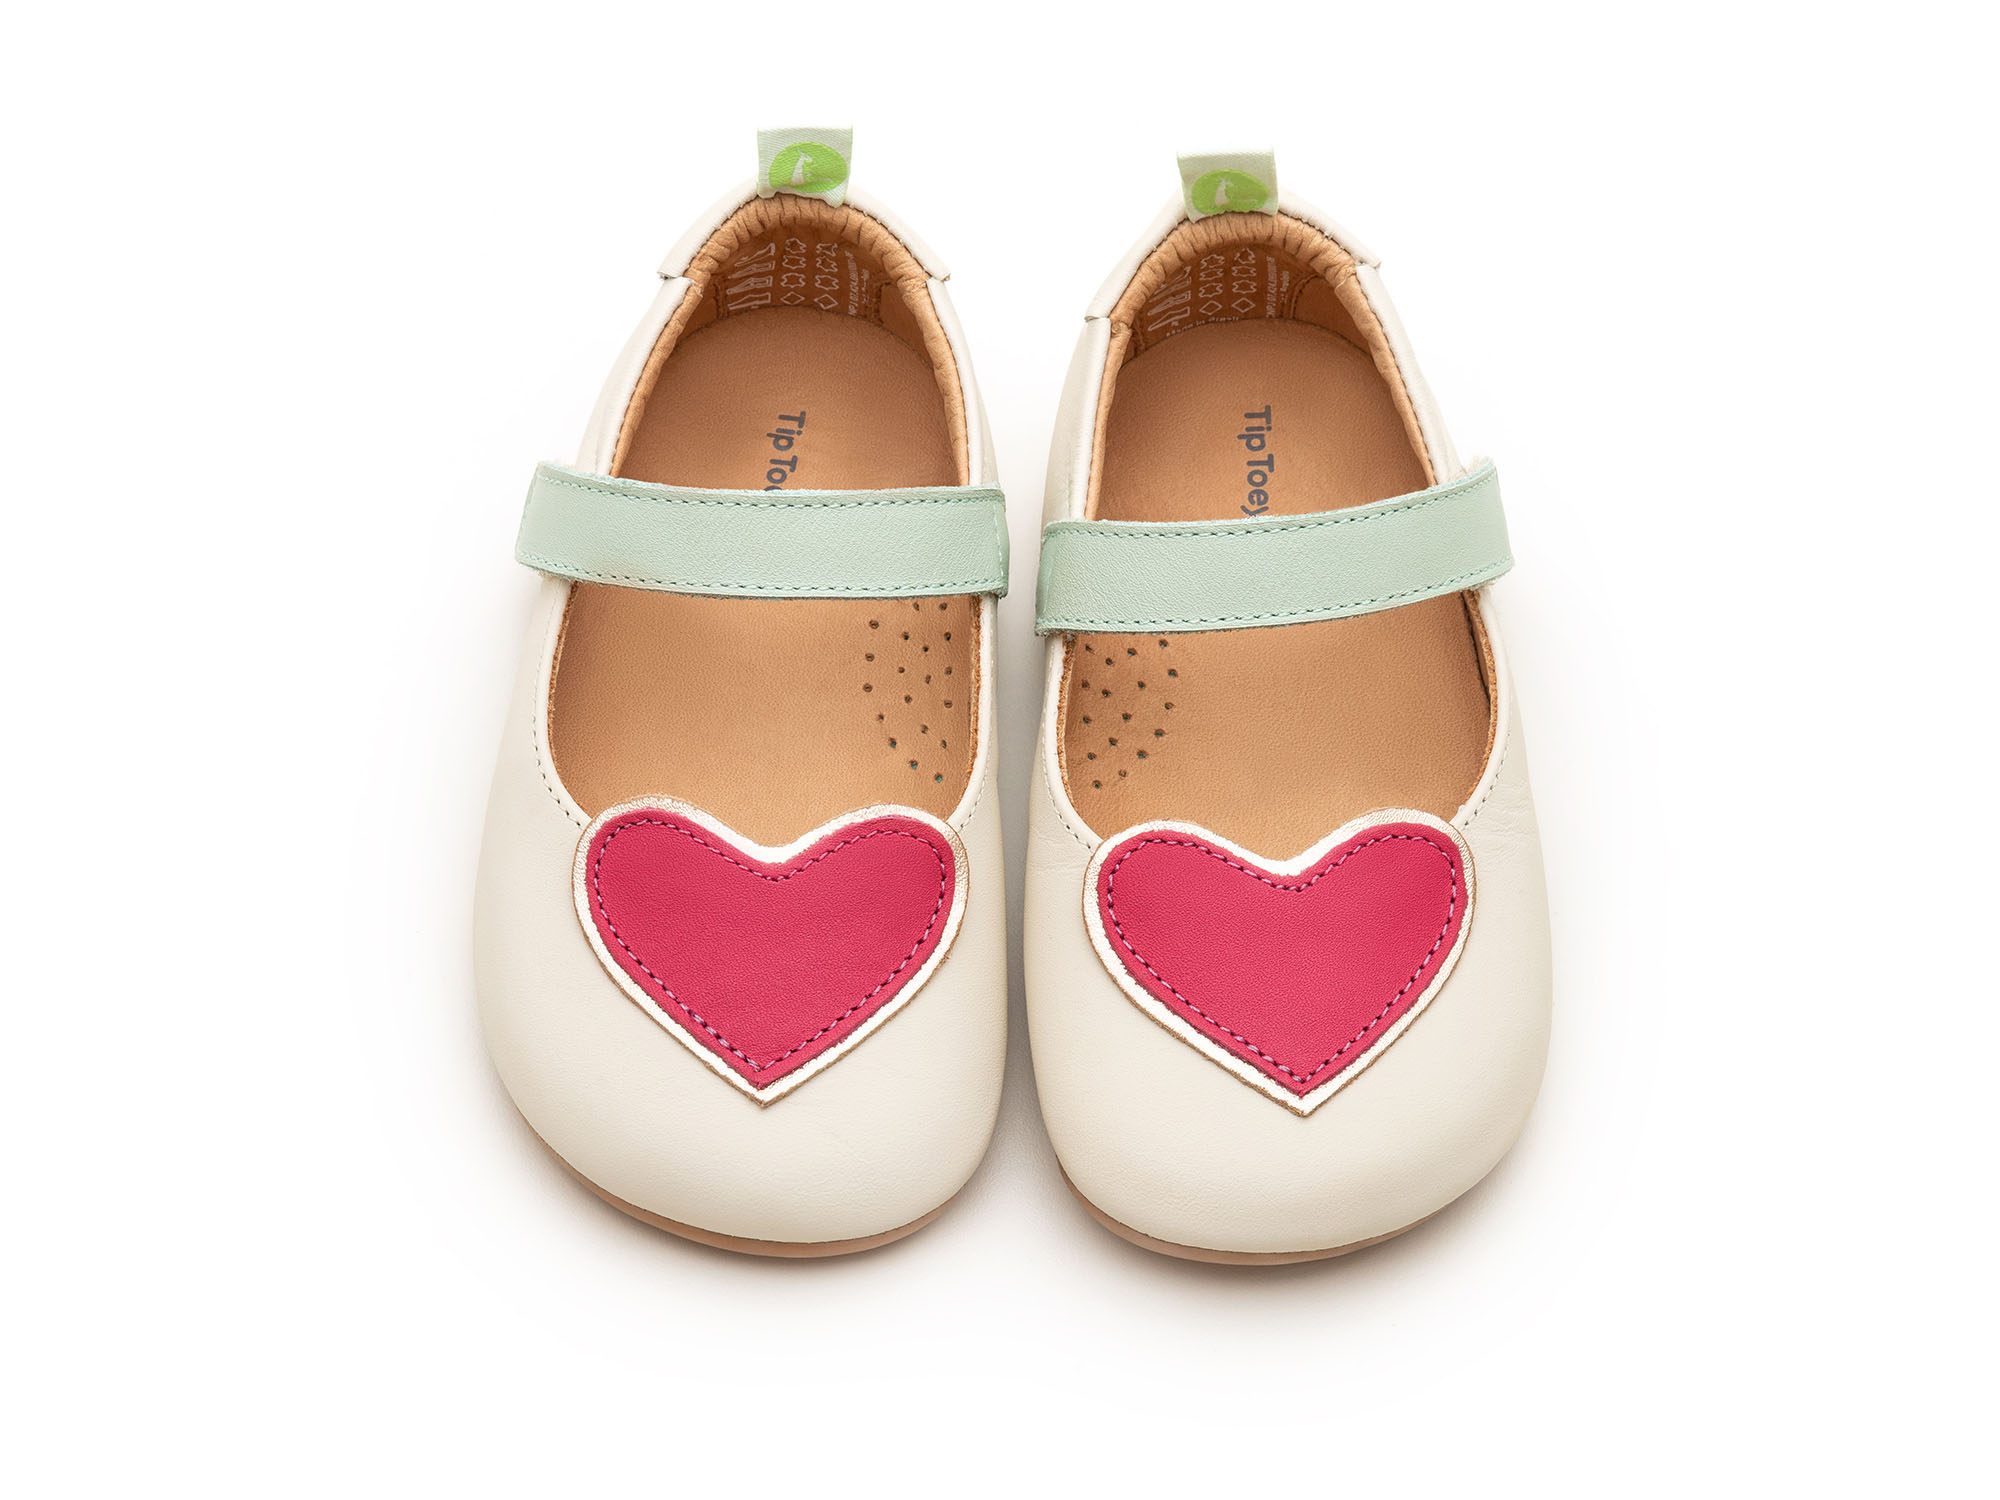 UP & GO Mary Janes for Girls Hearty | Tip Toey Joey - Australia - 4